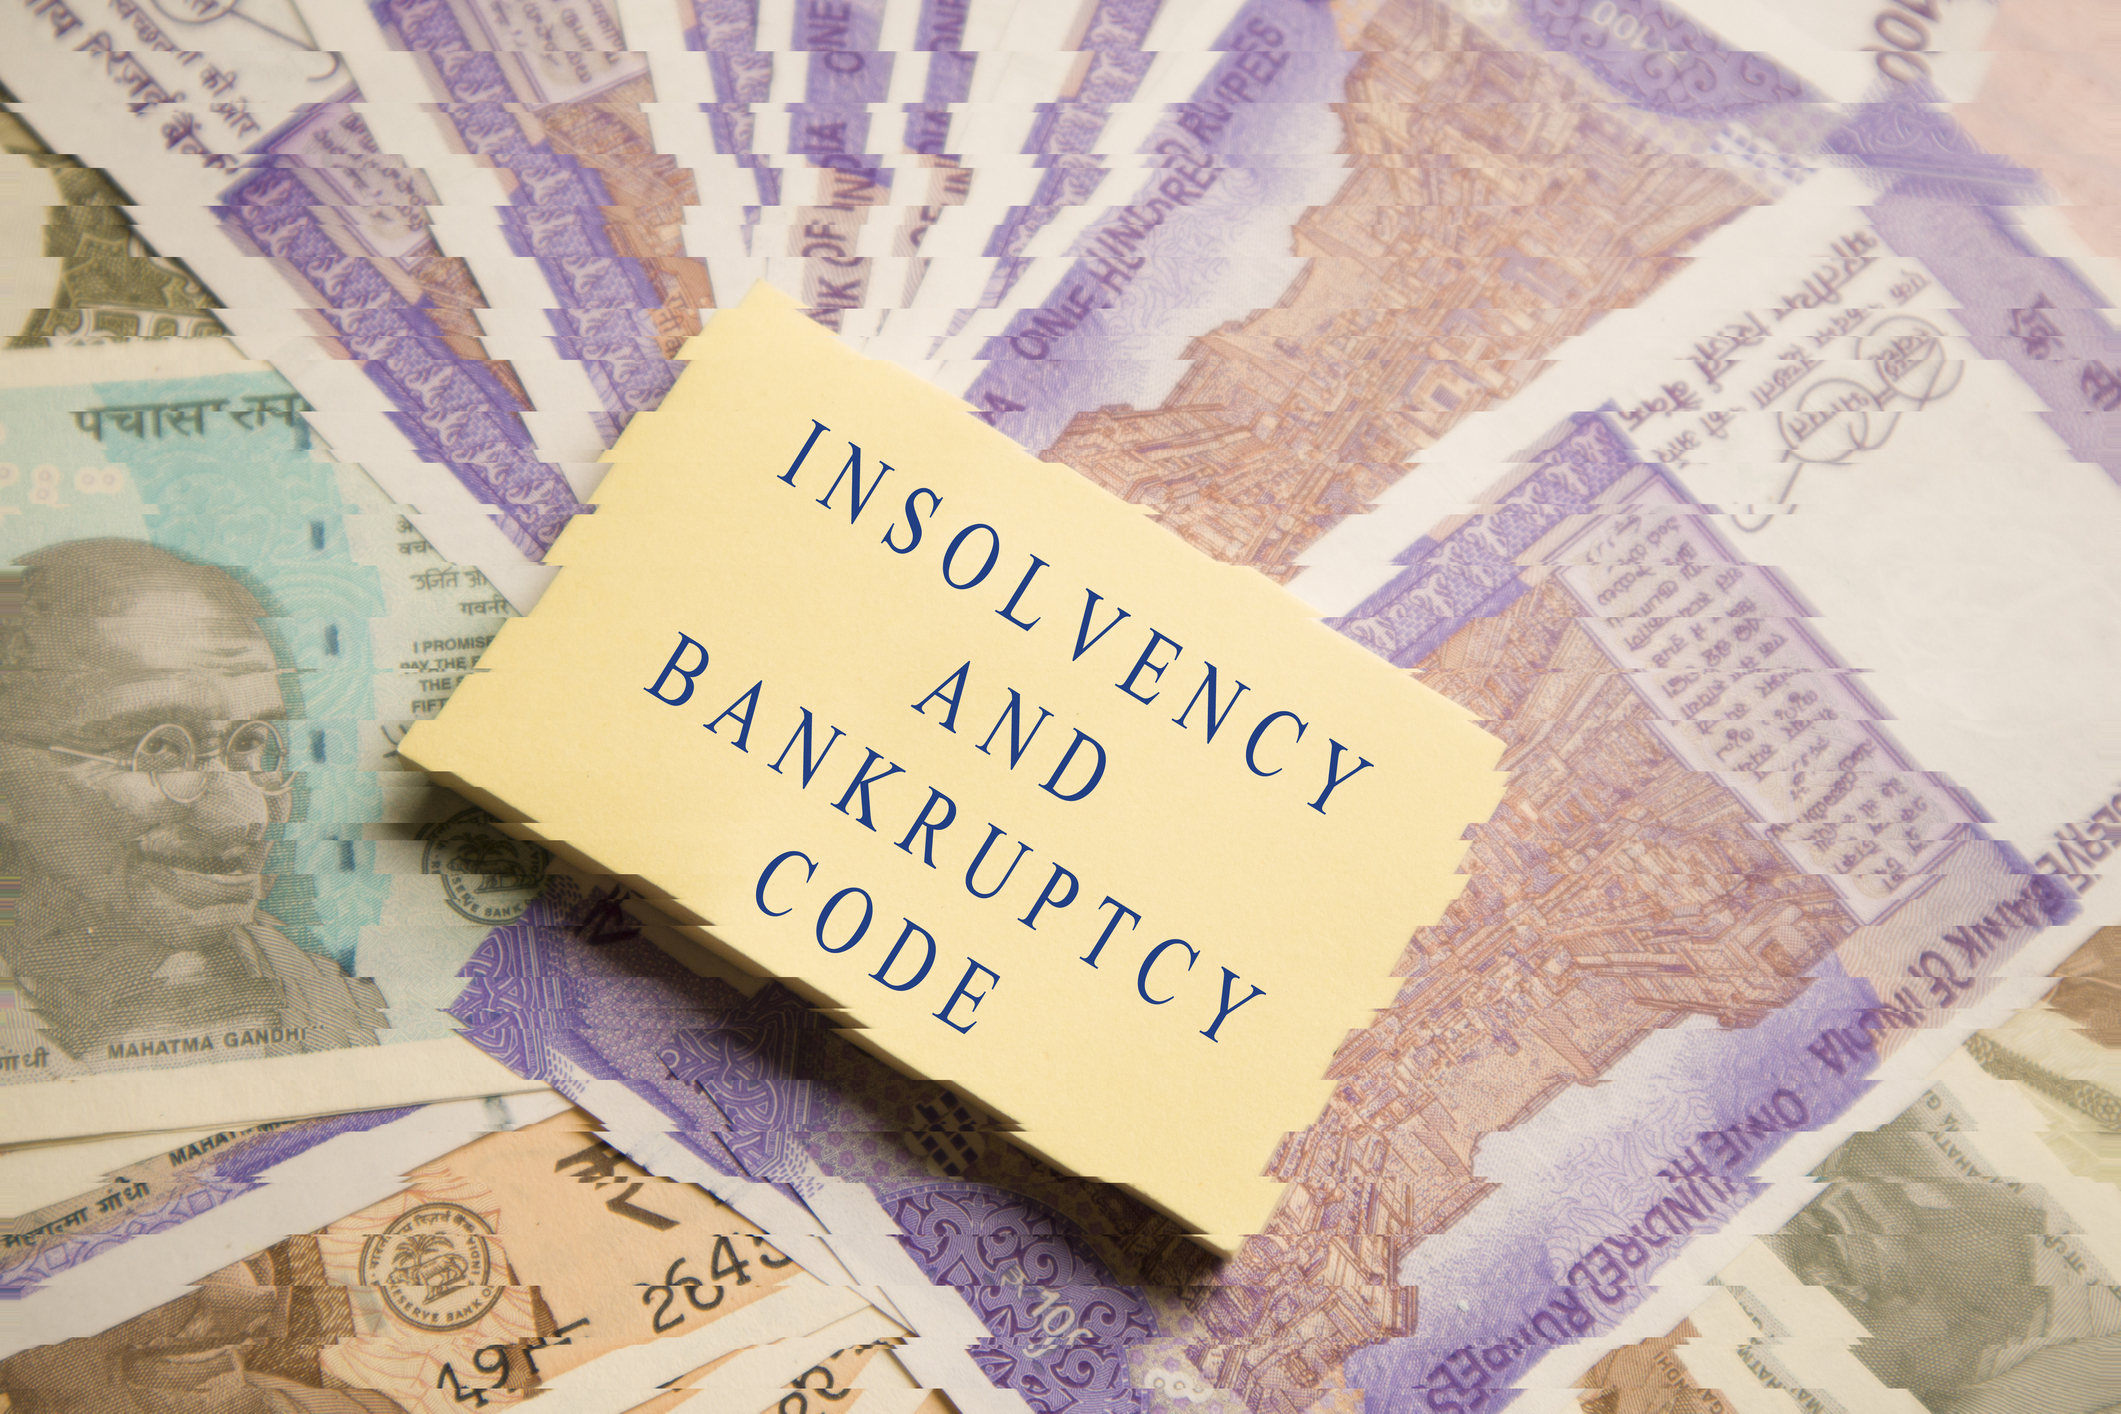 Latest developments in insolvency and bankruptcy in India